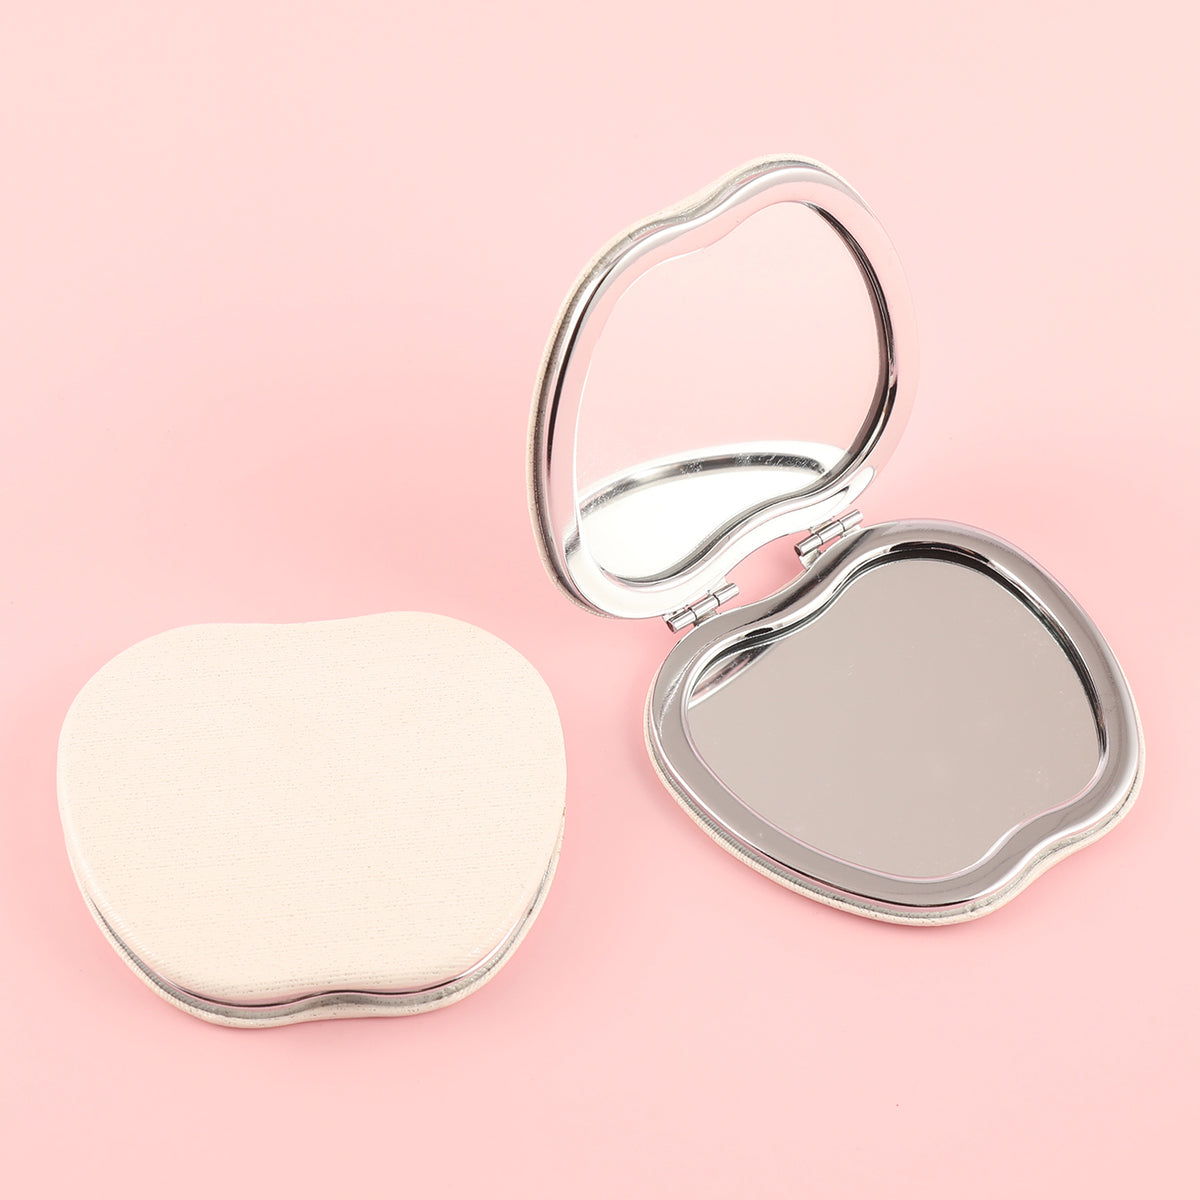 ✨Chic Foldable Elegance✨ 65*75mm Apple-shaped Makeup Mirror with 